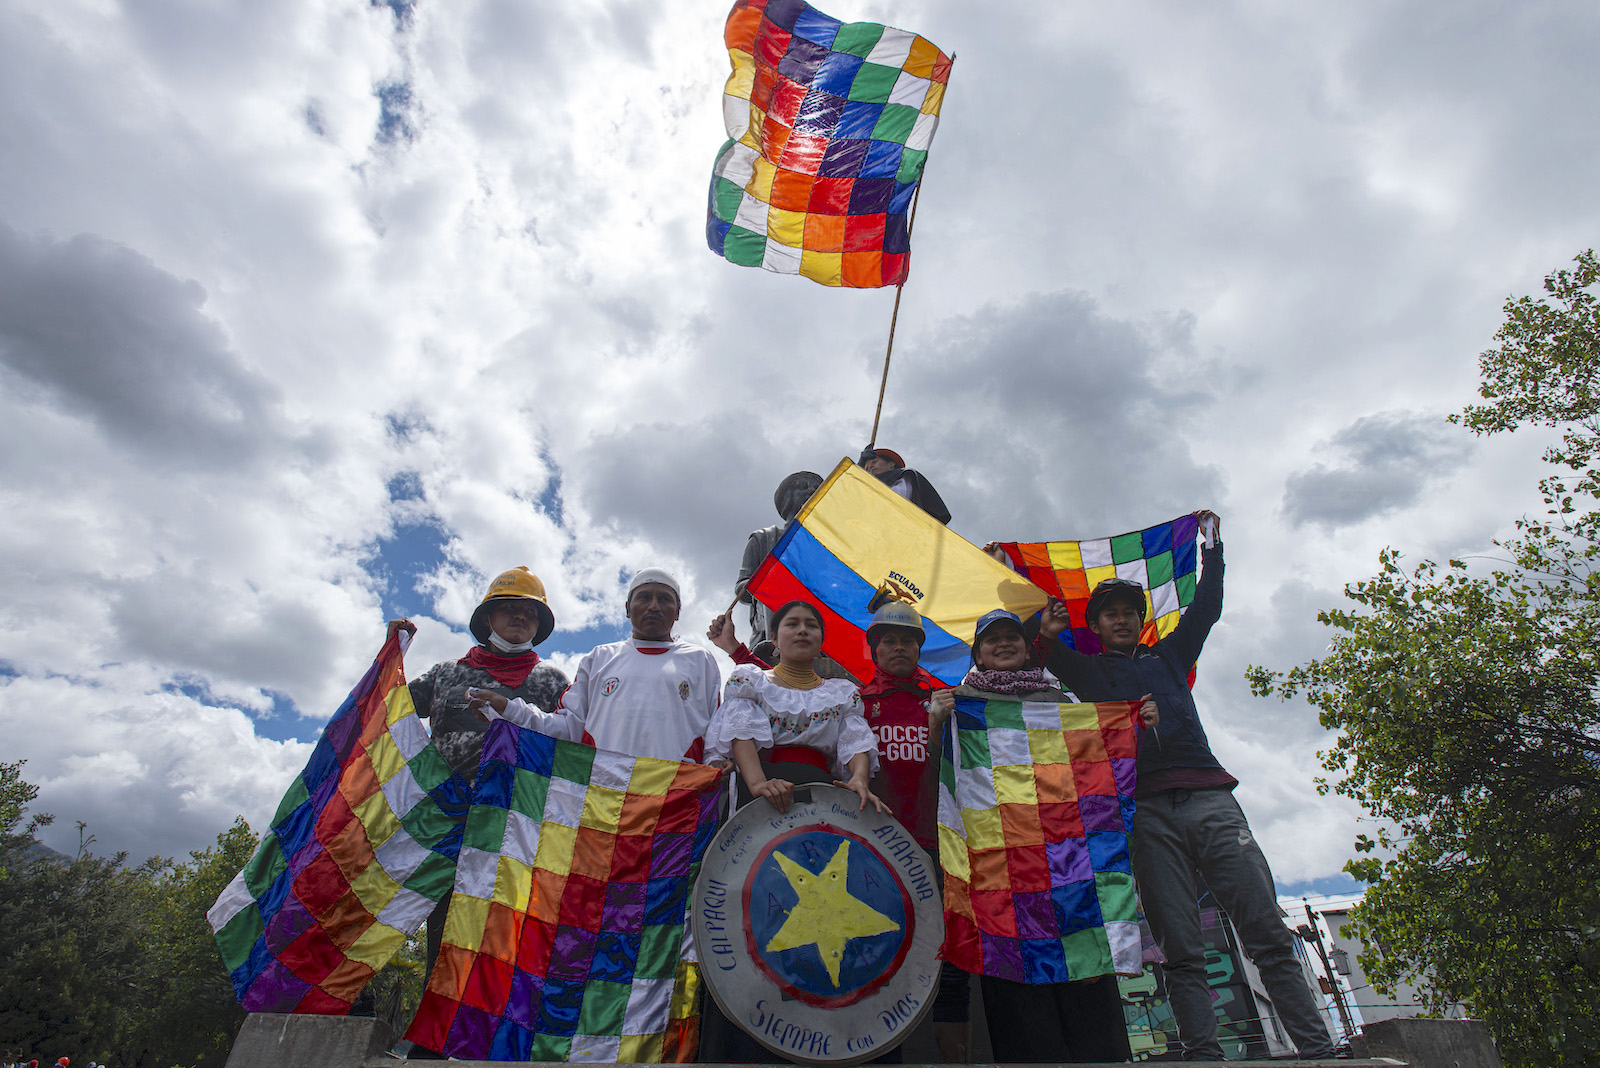 A group of protestors with rainbow checkered flags stand against a cloudy sky